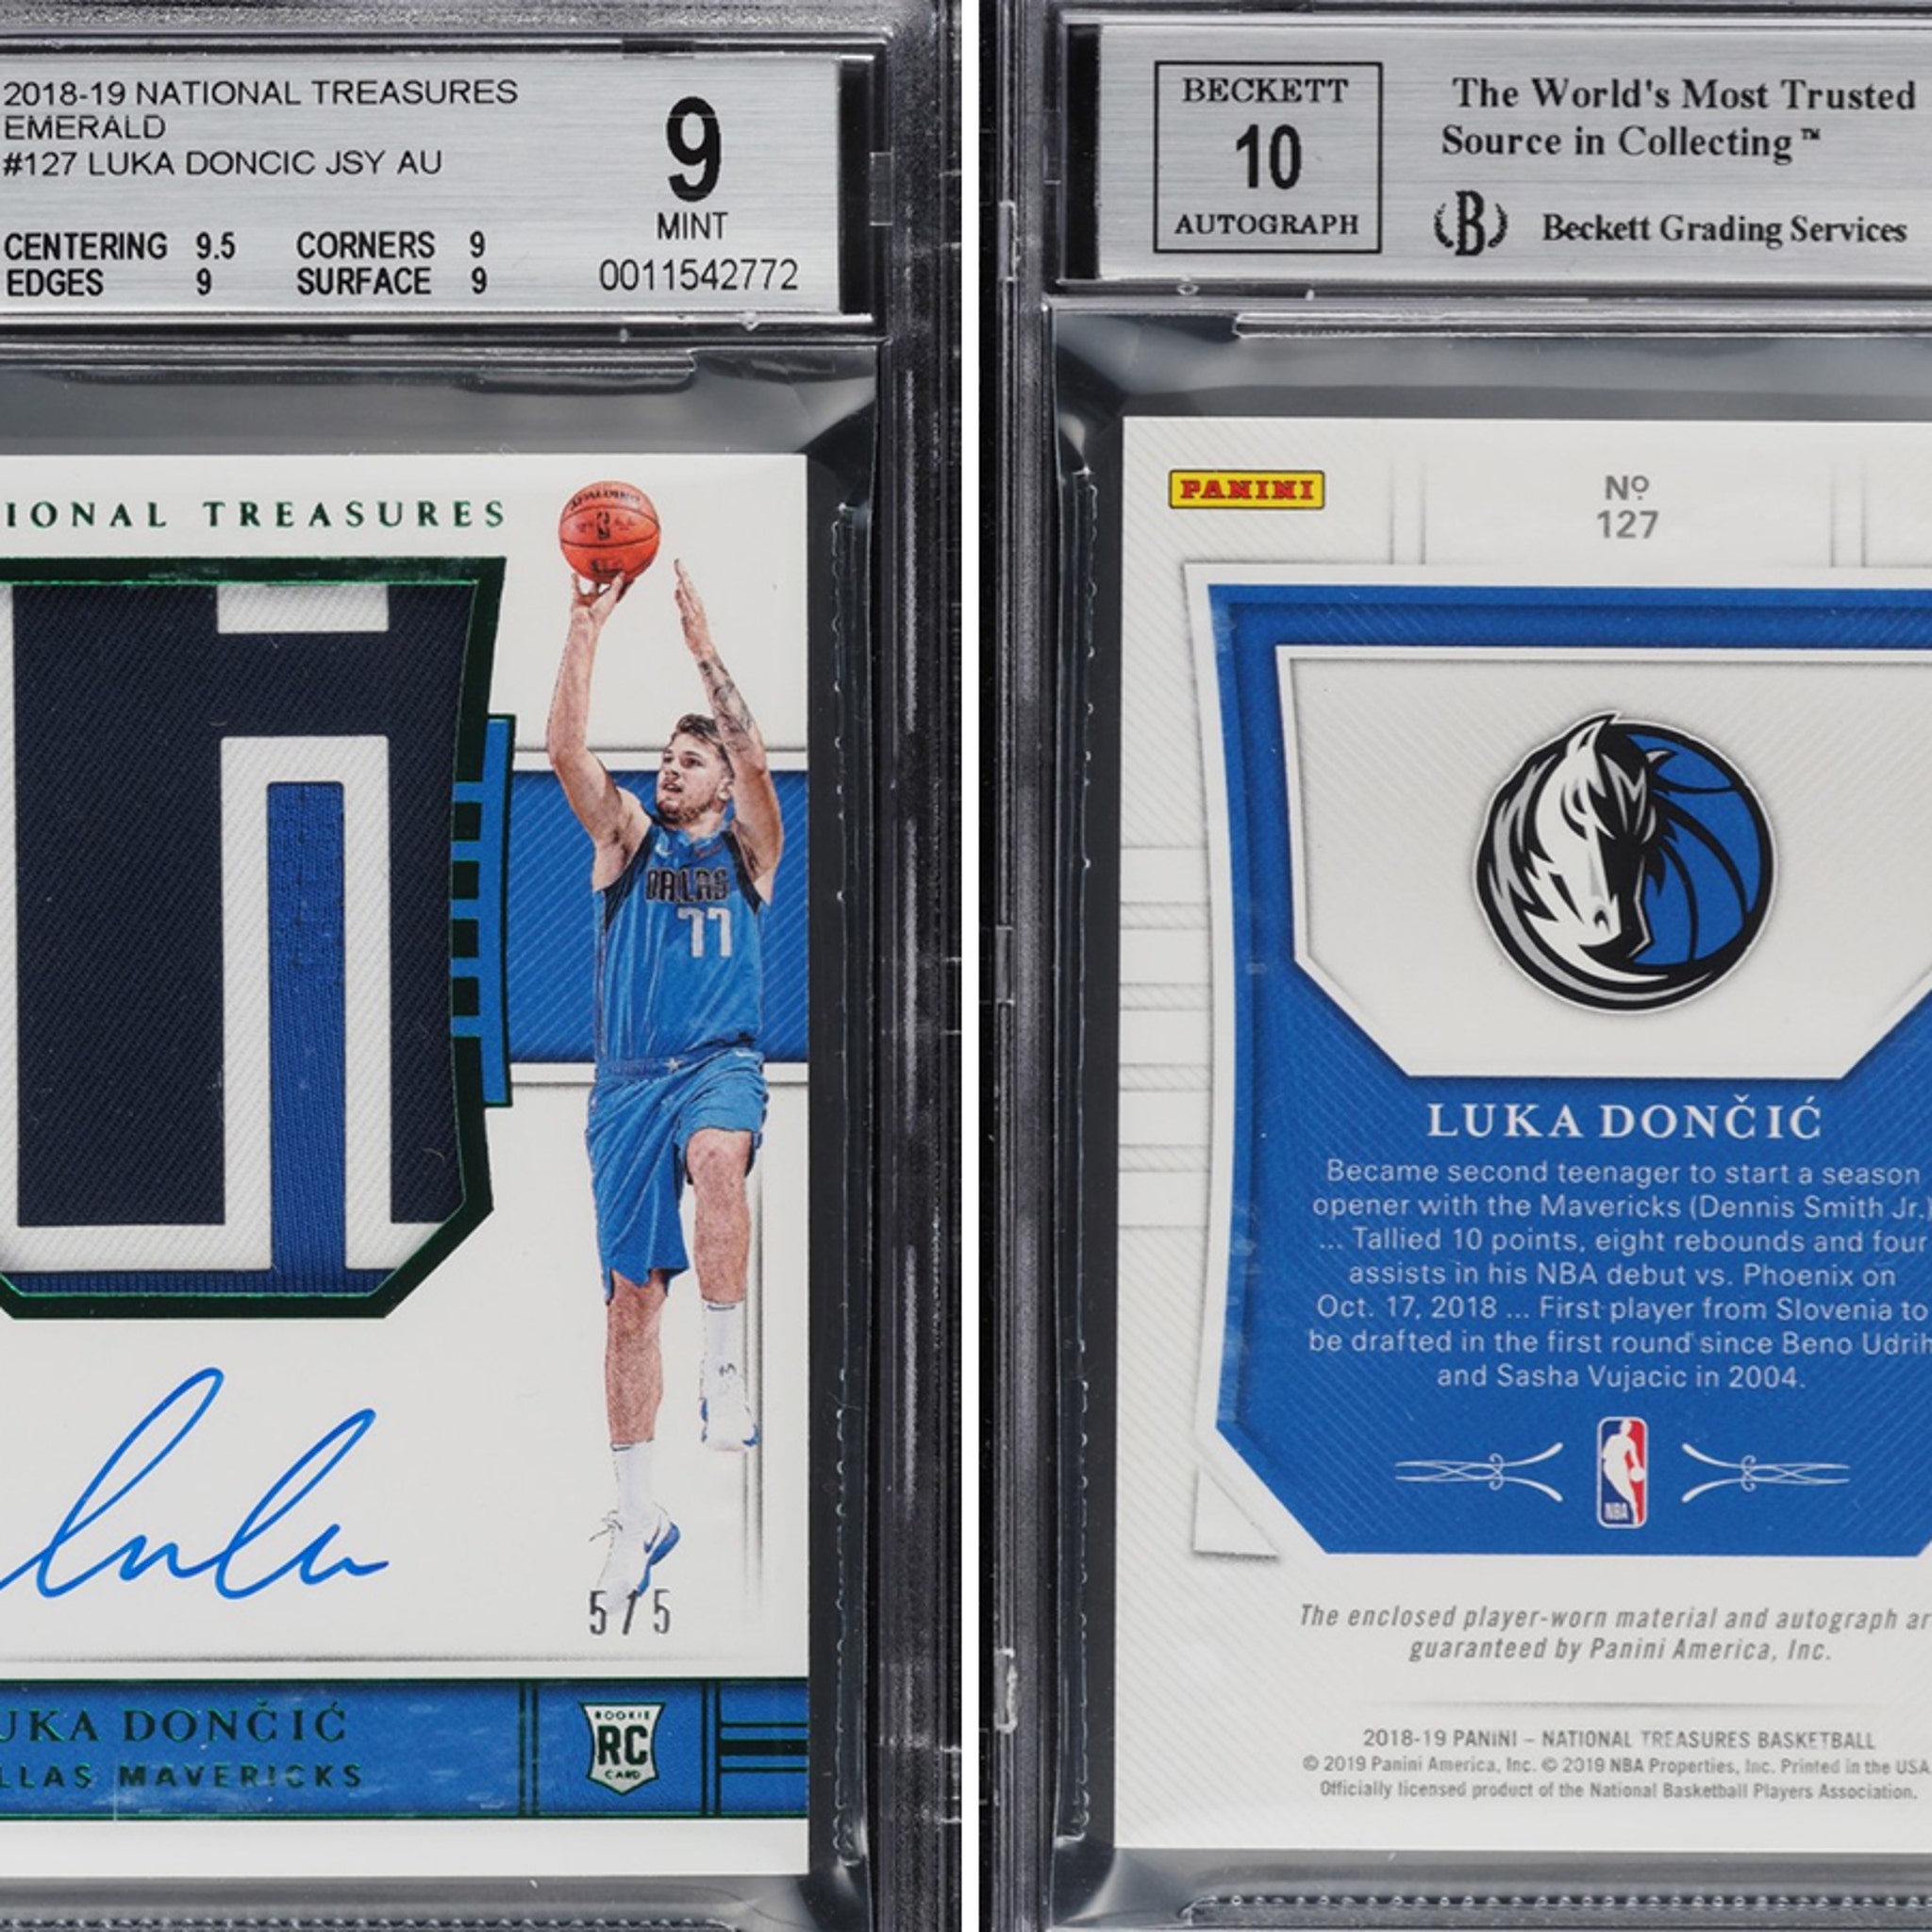 Luka Dončić Autographed Rookie Card W/ Jersey Patch Expected To 